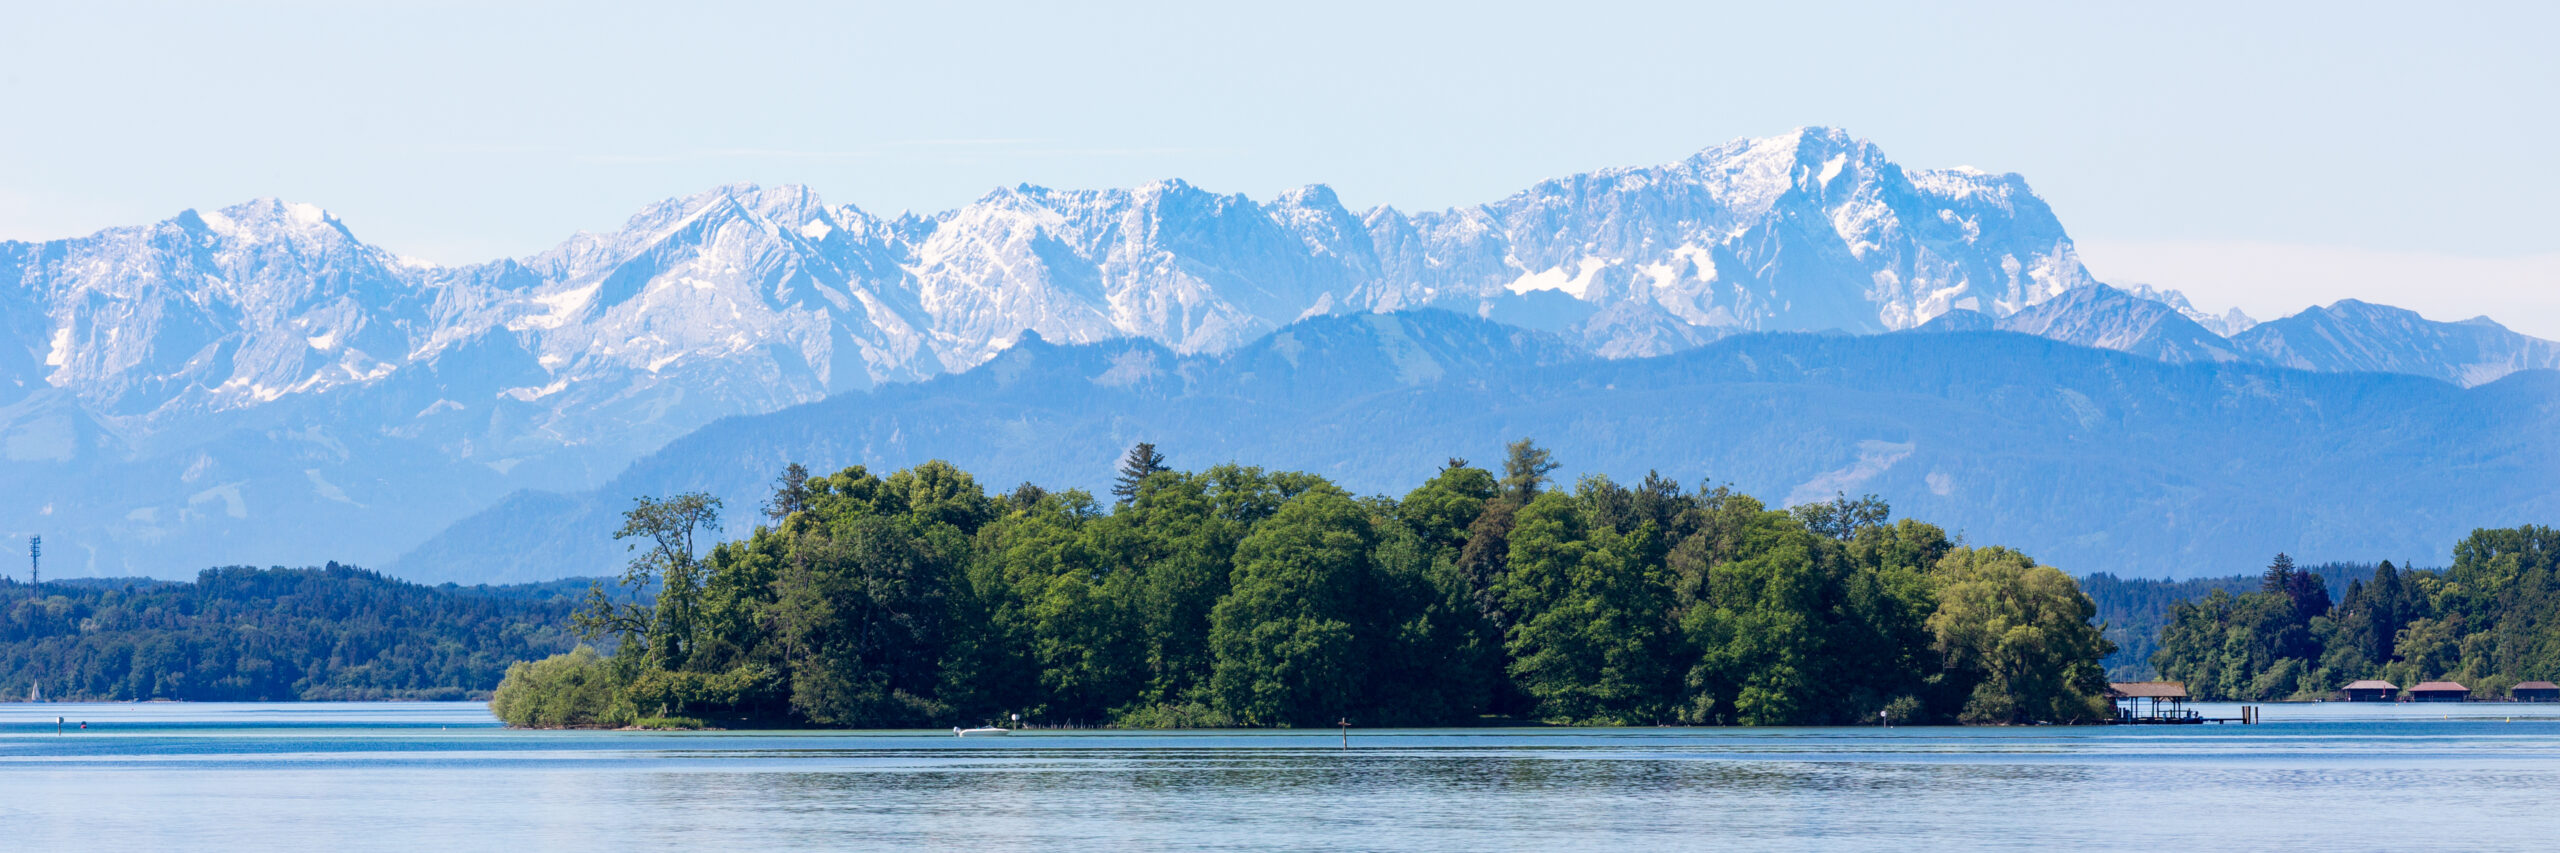 Panorama Of Roseninsel (rose Island) With Bavarian Alps In The B